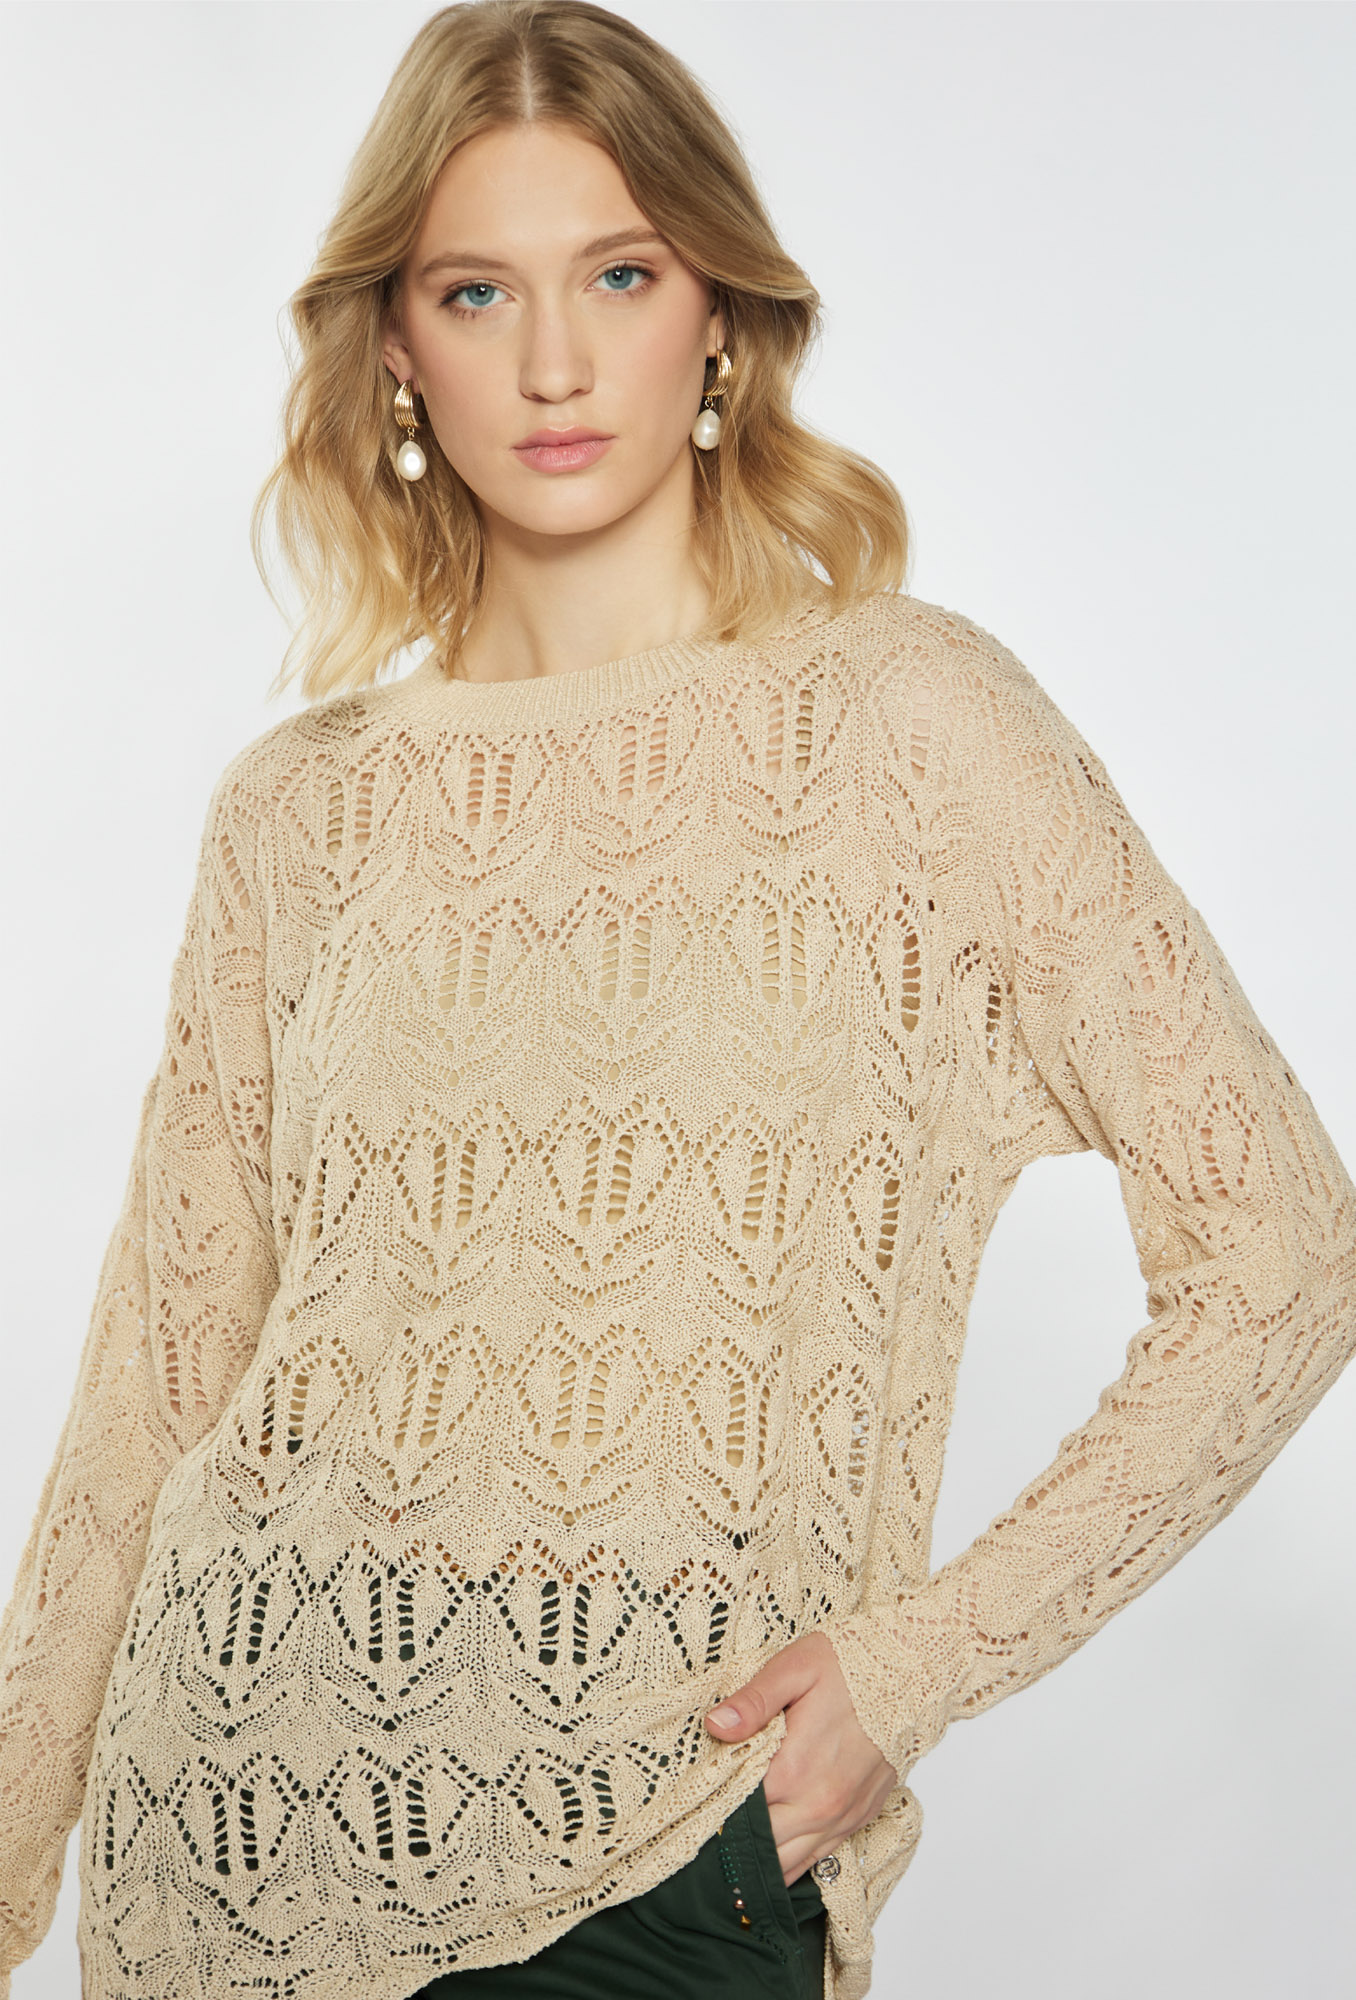 MONNARI Woman's Jumpers & Cardigans Openwork Sweater With Long Sleeves